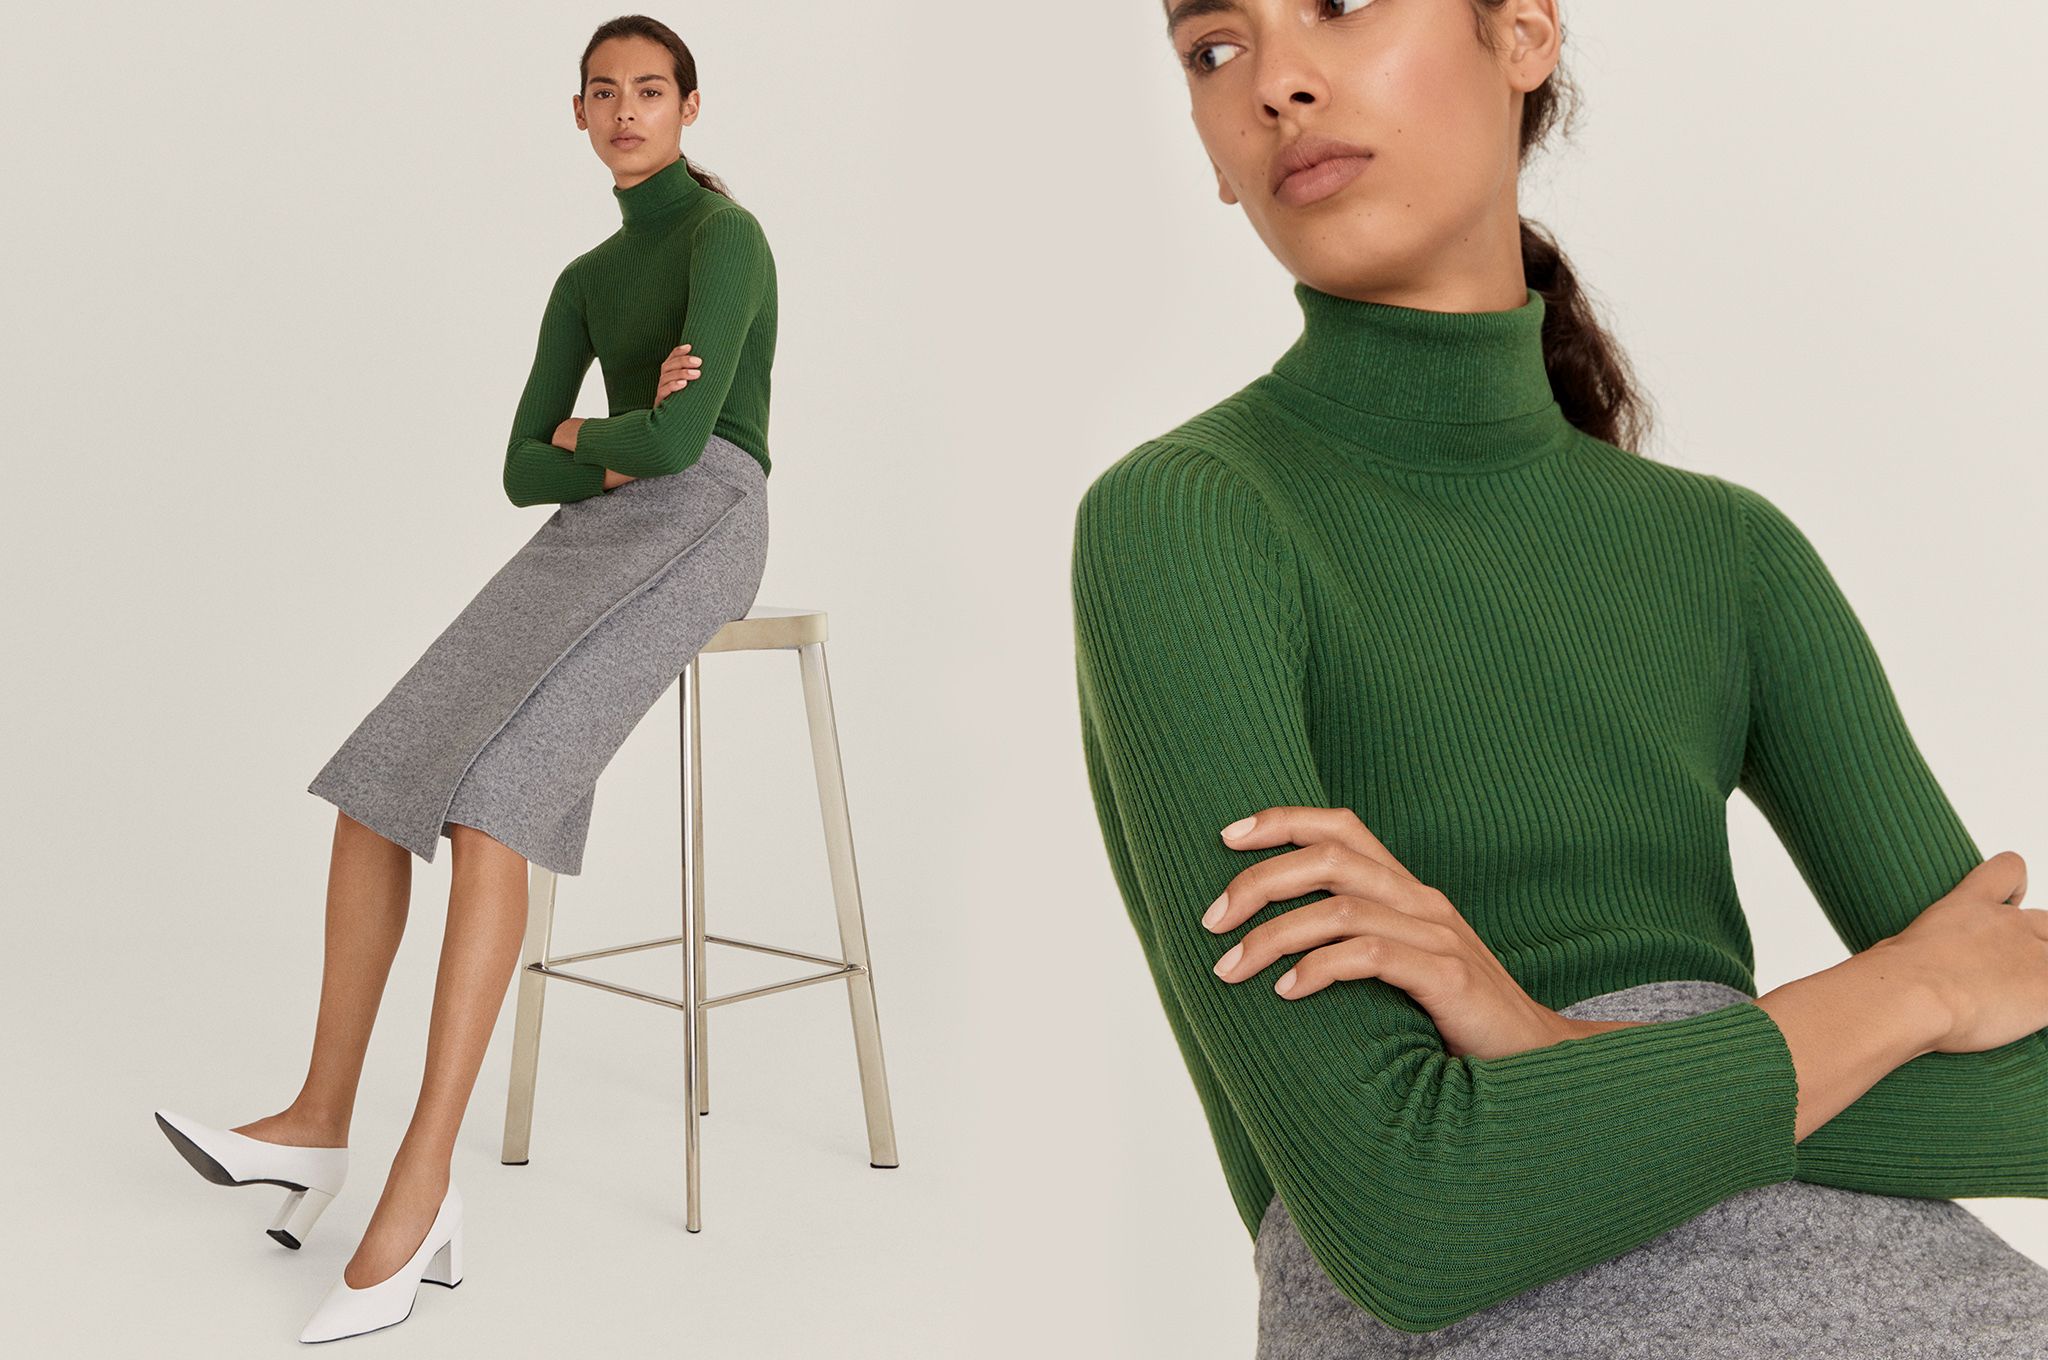 Model wearing green roll-neck, grey skirt and white shoes